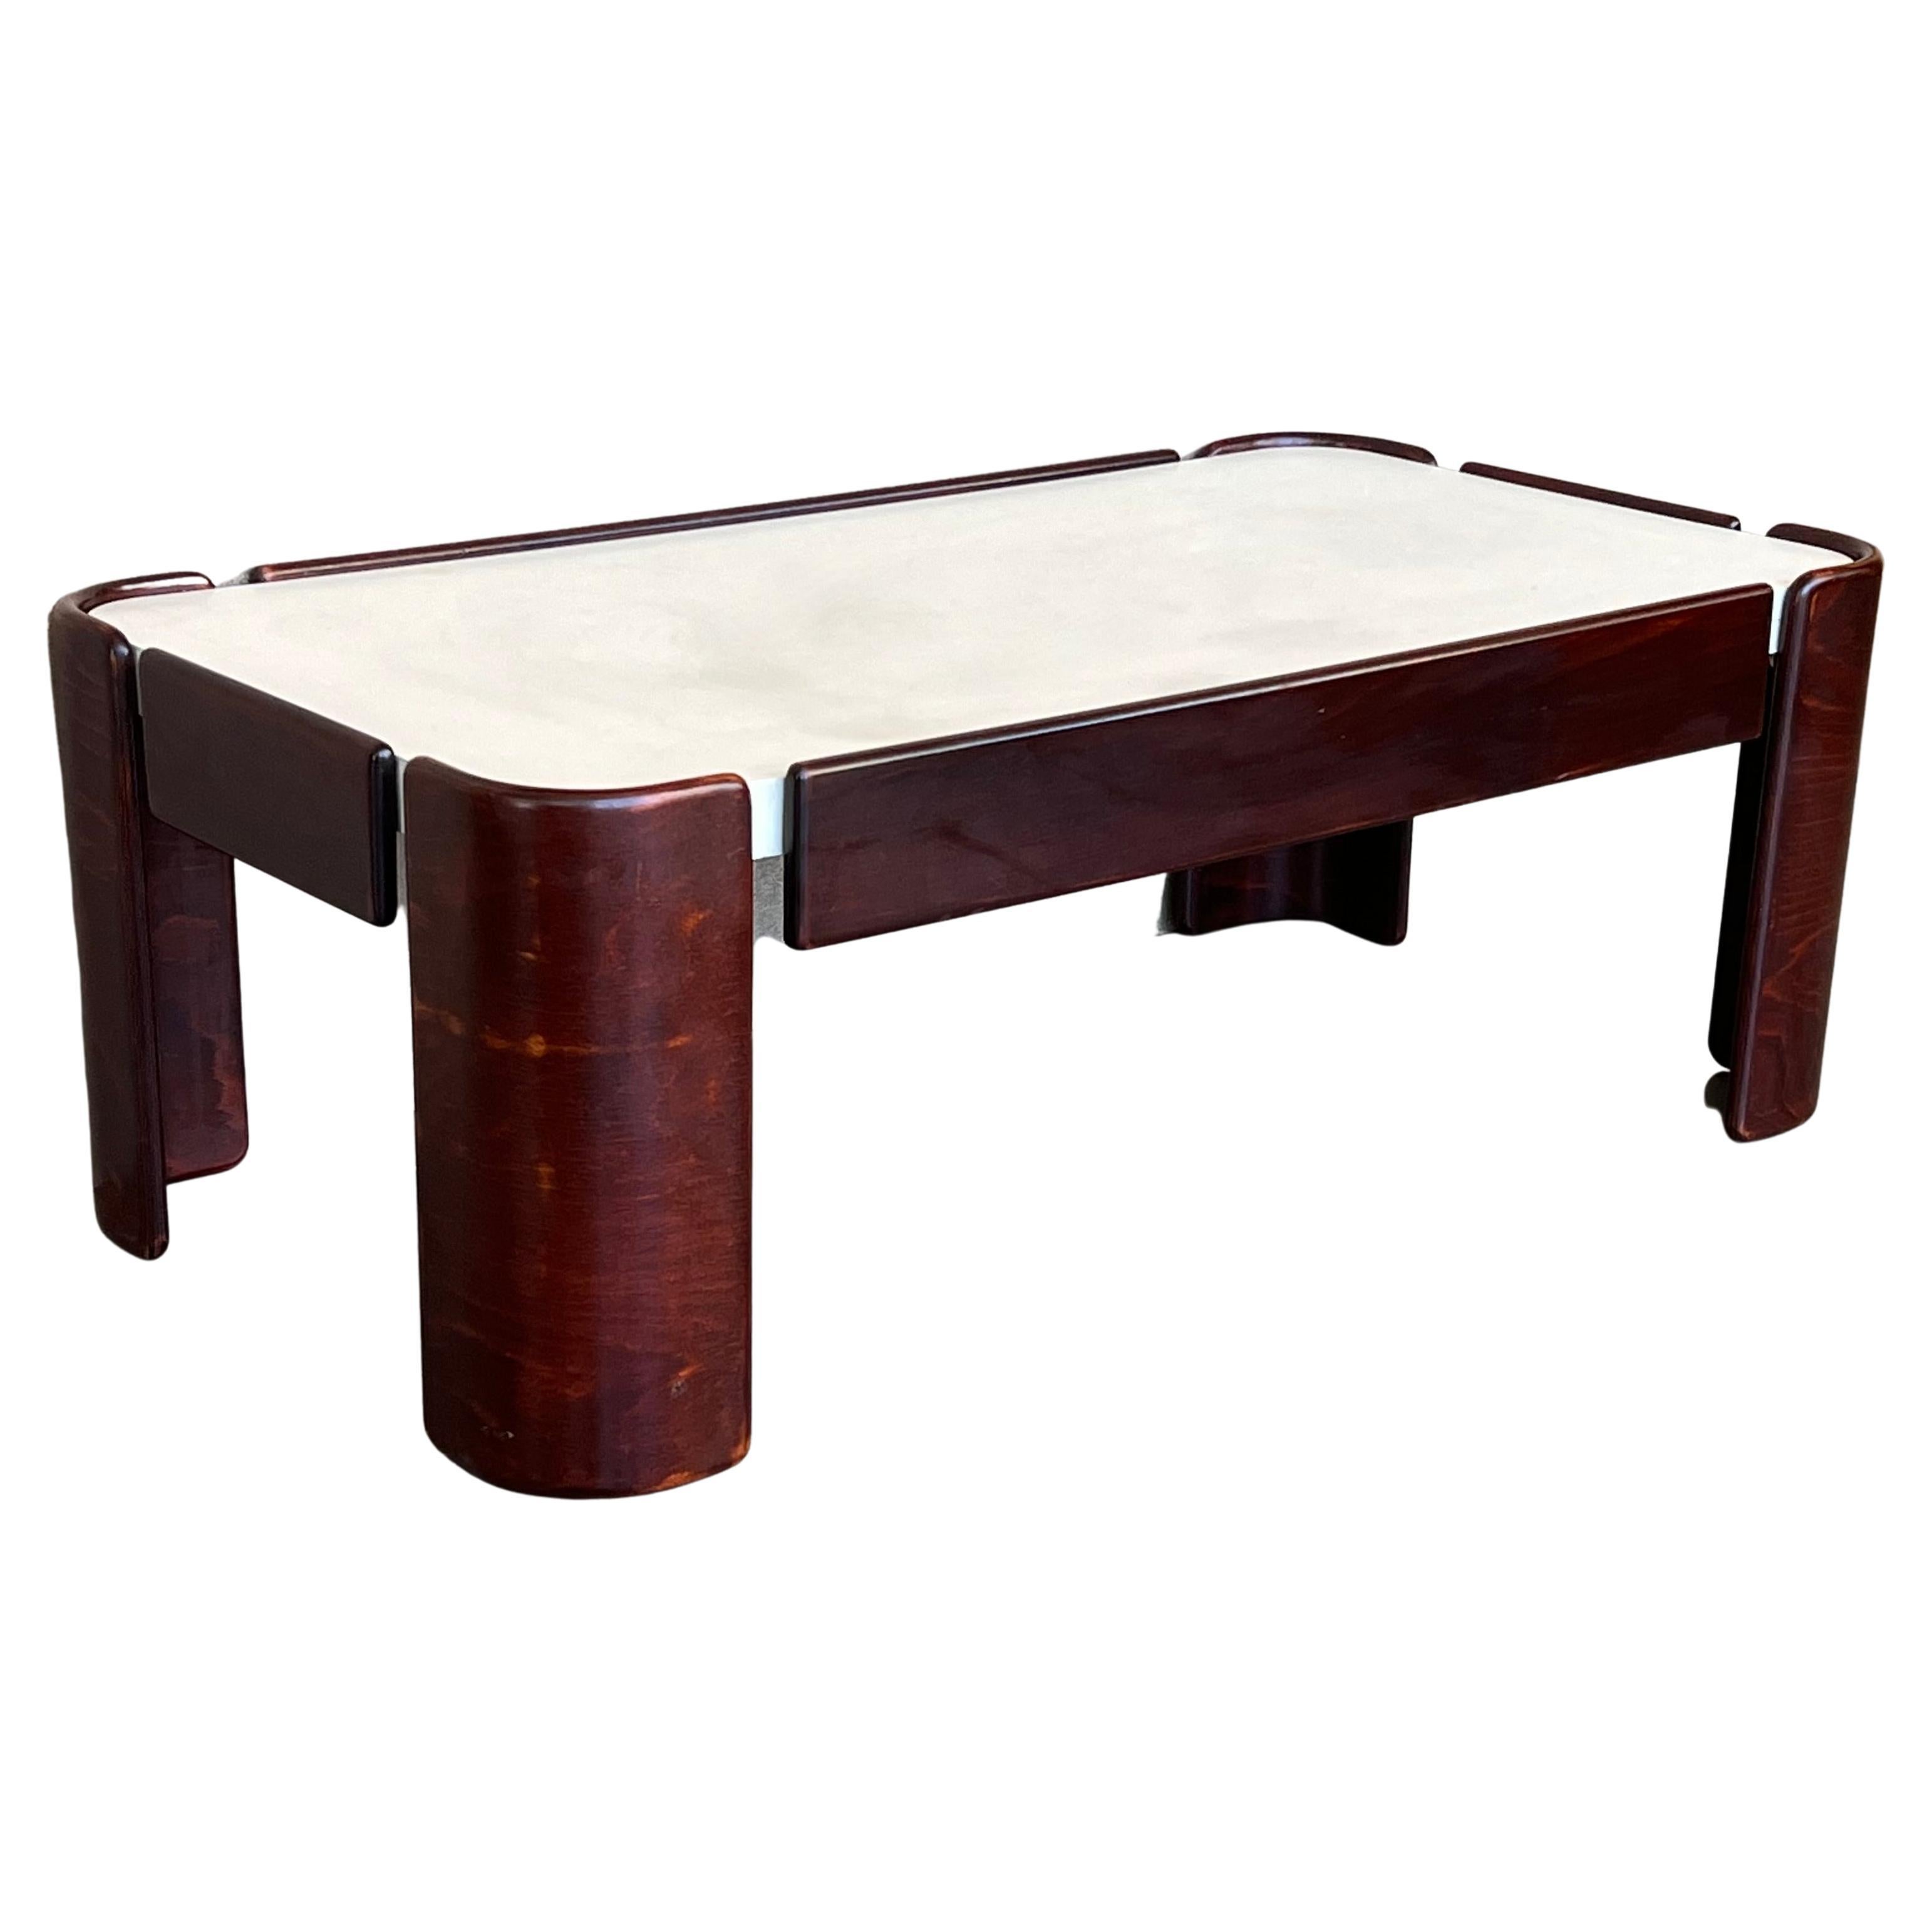 Mid-Century Modern Rectangular Table with Curved Legs and White Top